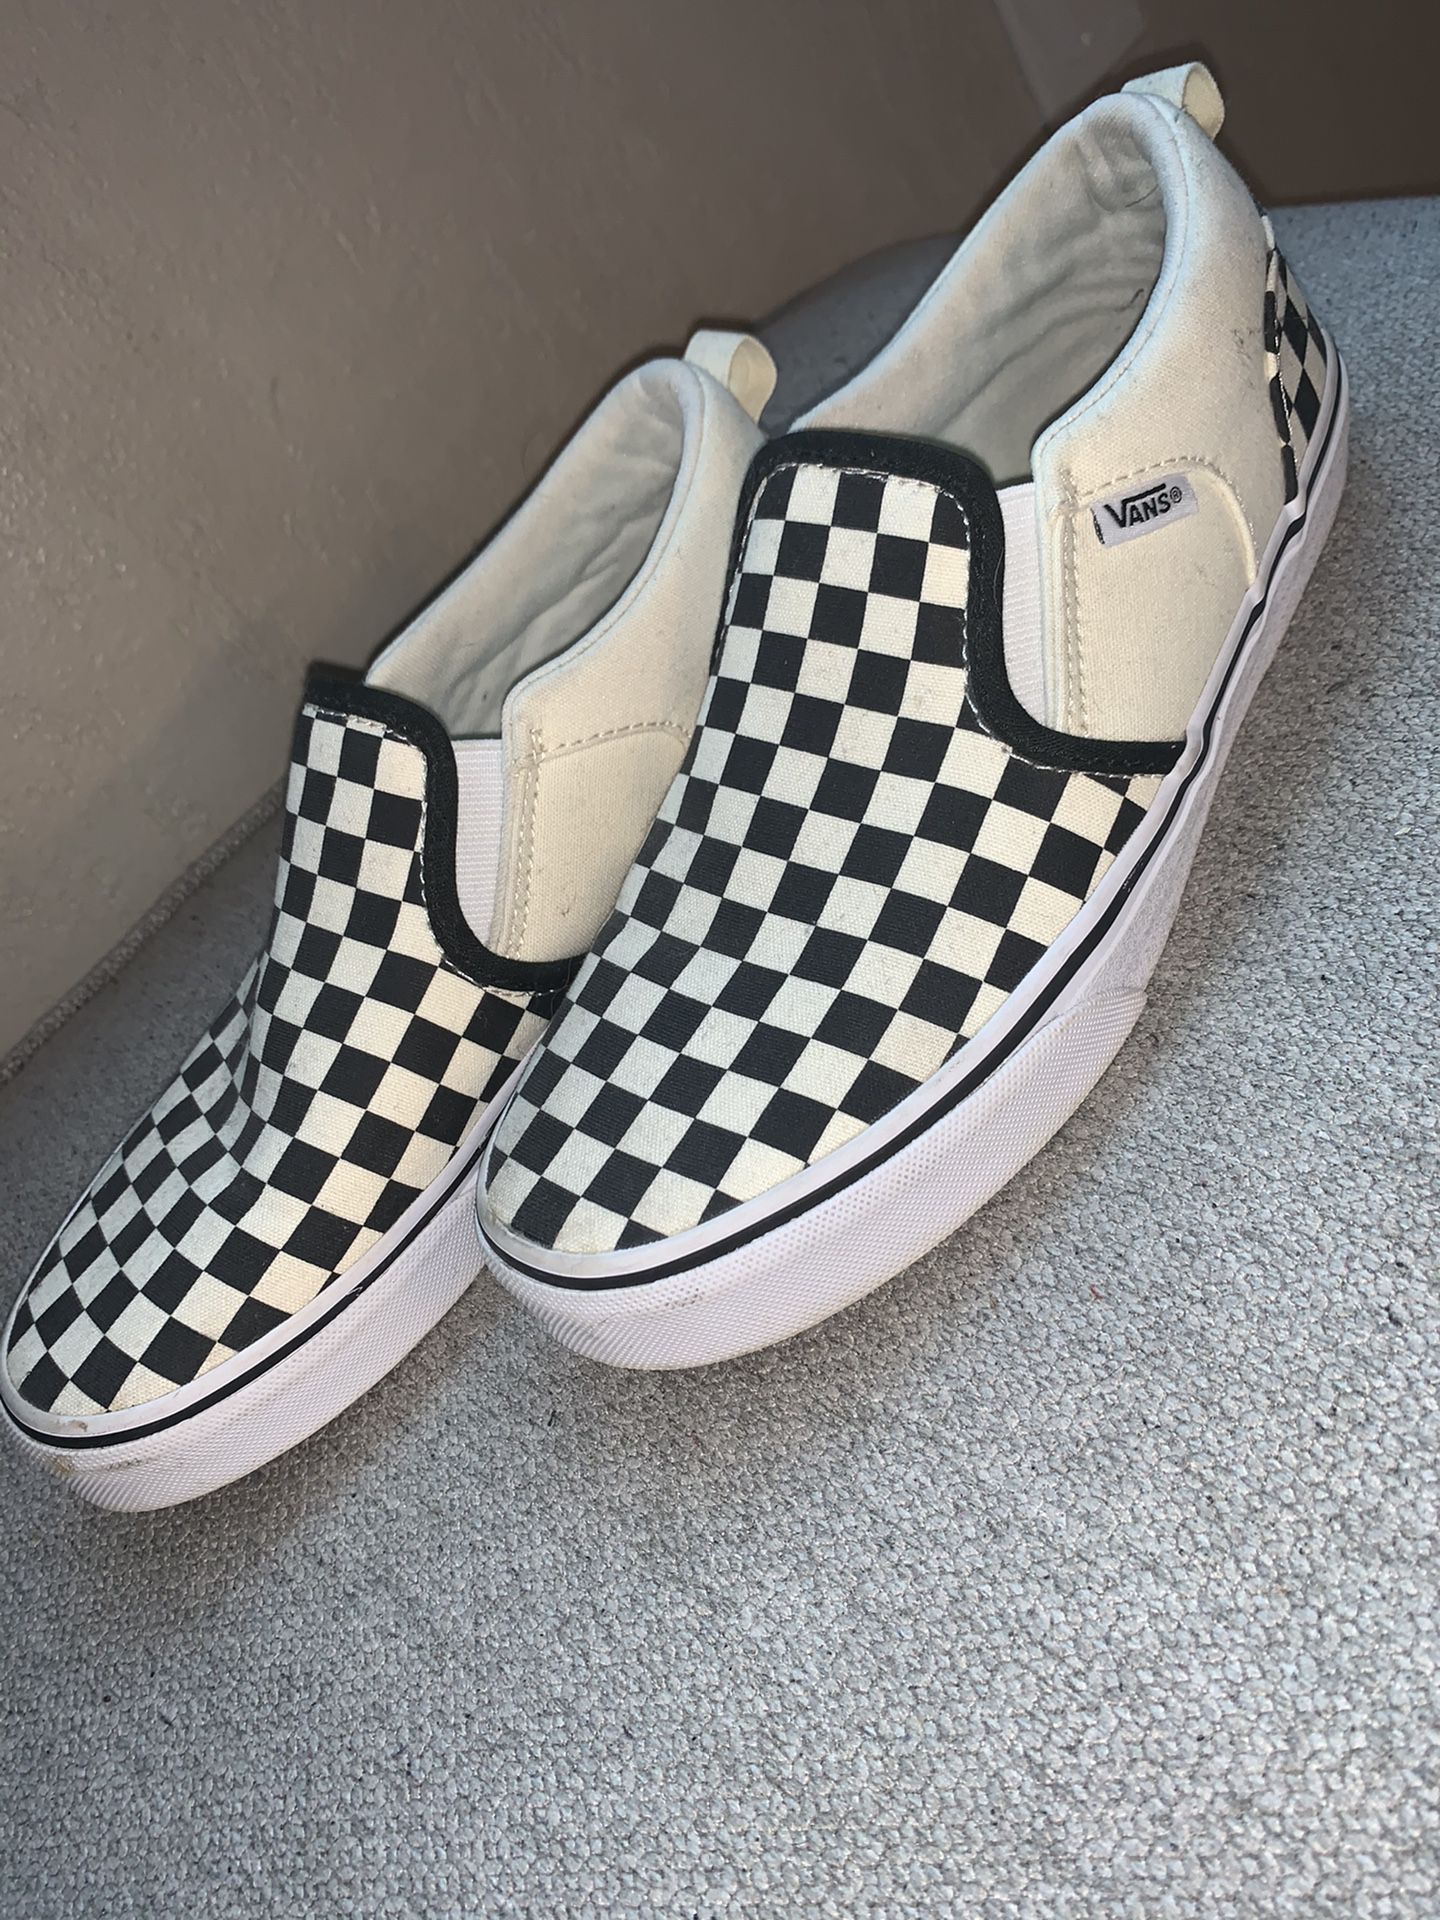 Checkered Vans size Youth 6